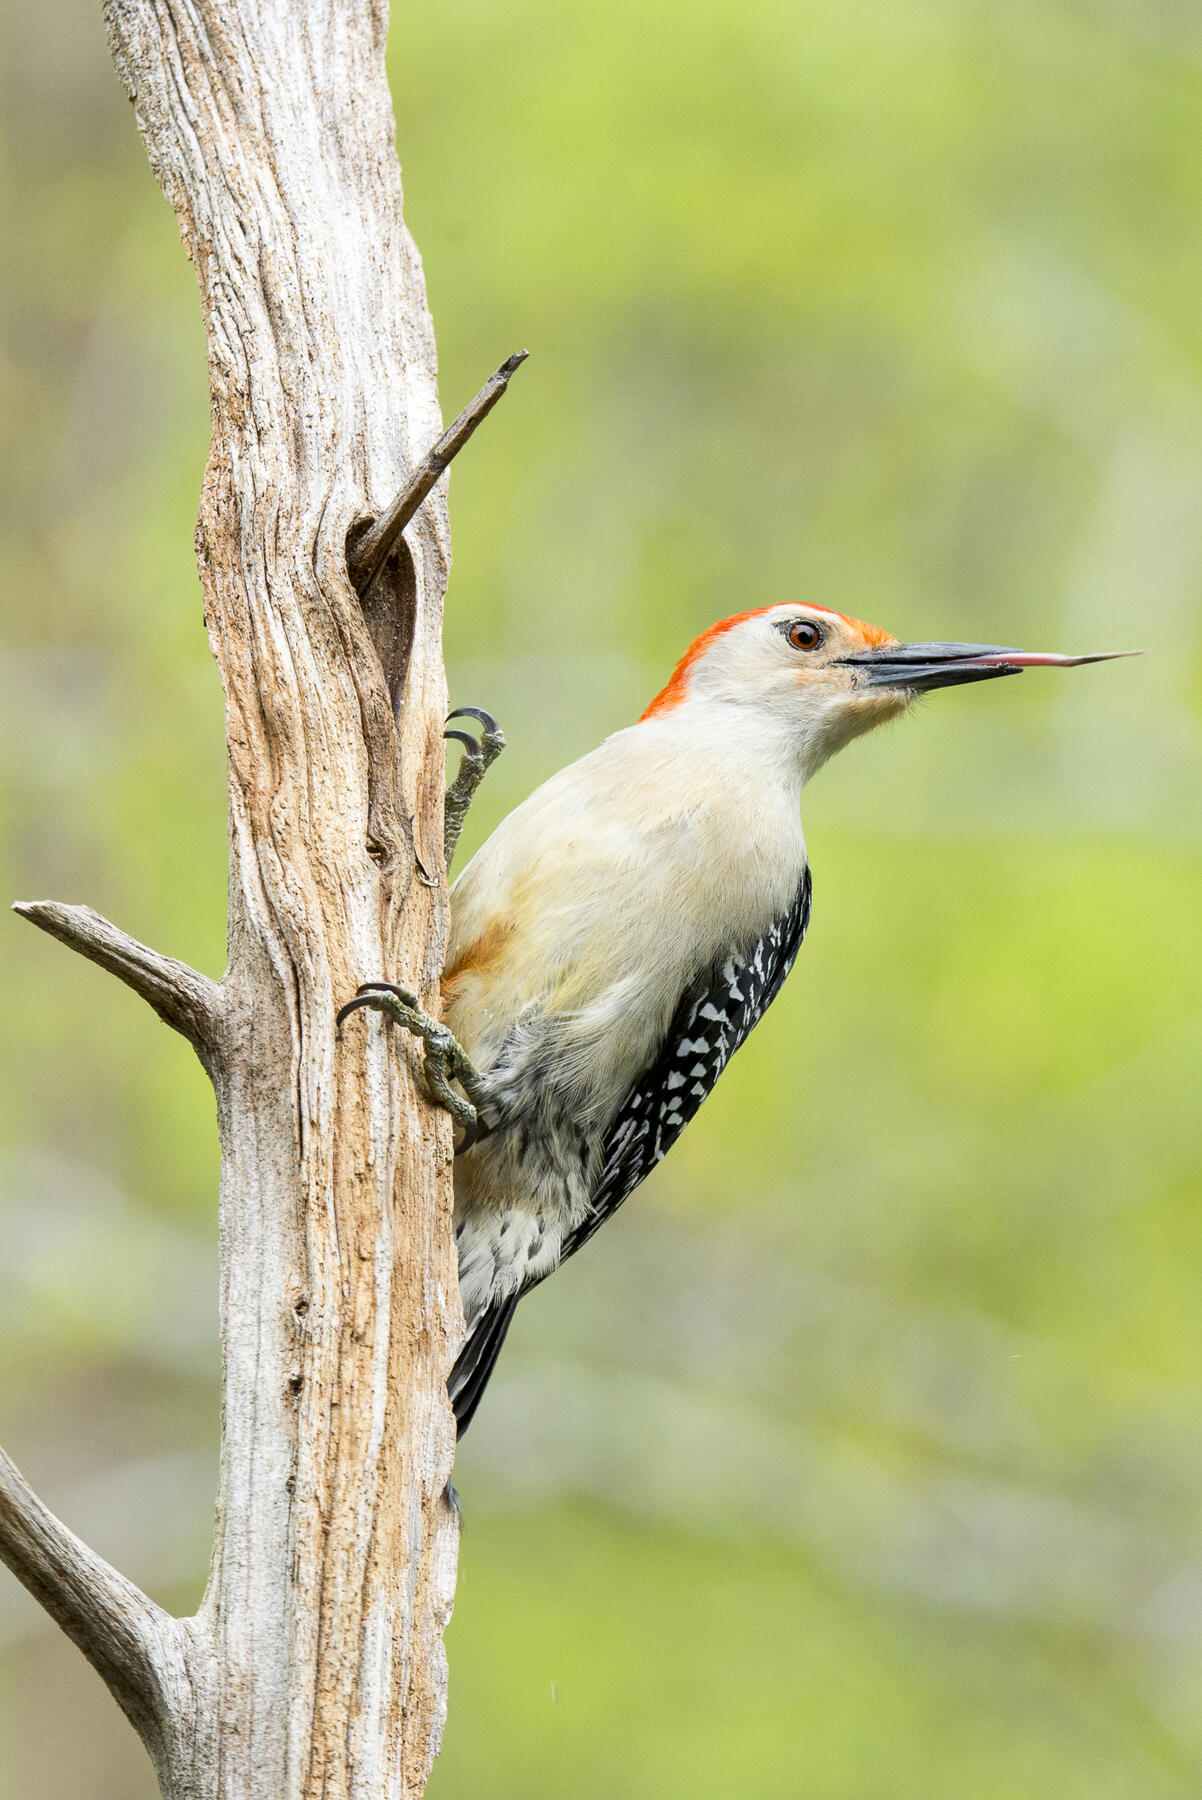 A Red-bellied Woodpecker feeds on a small snag.